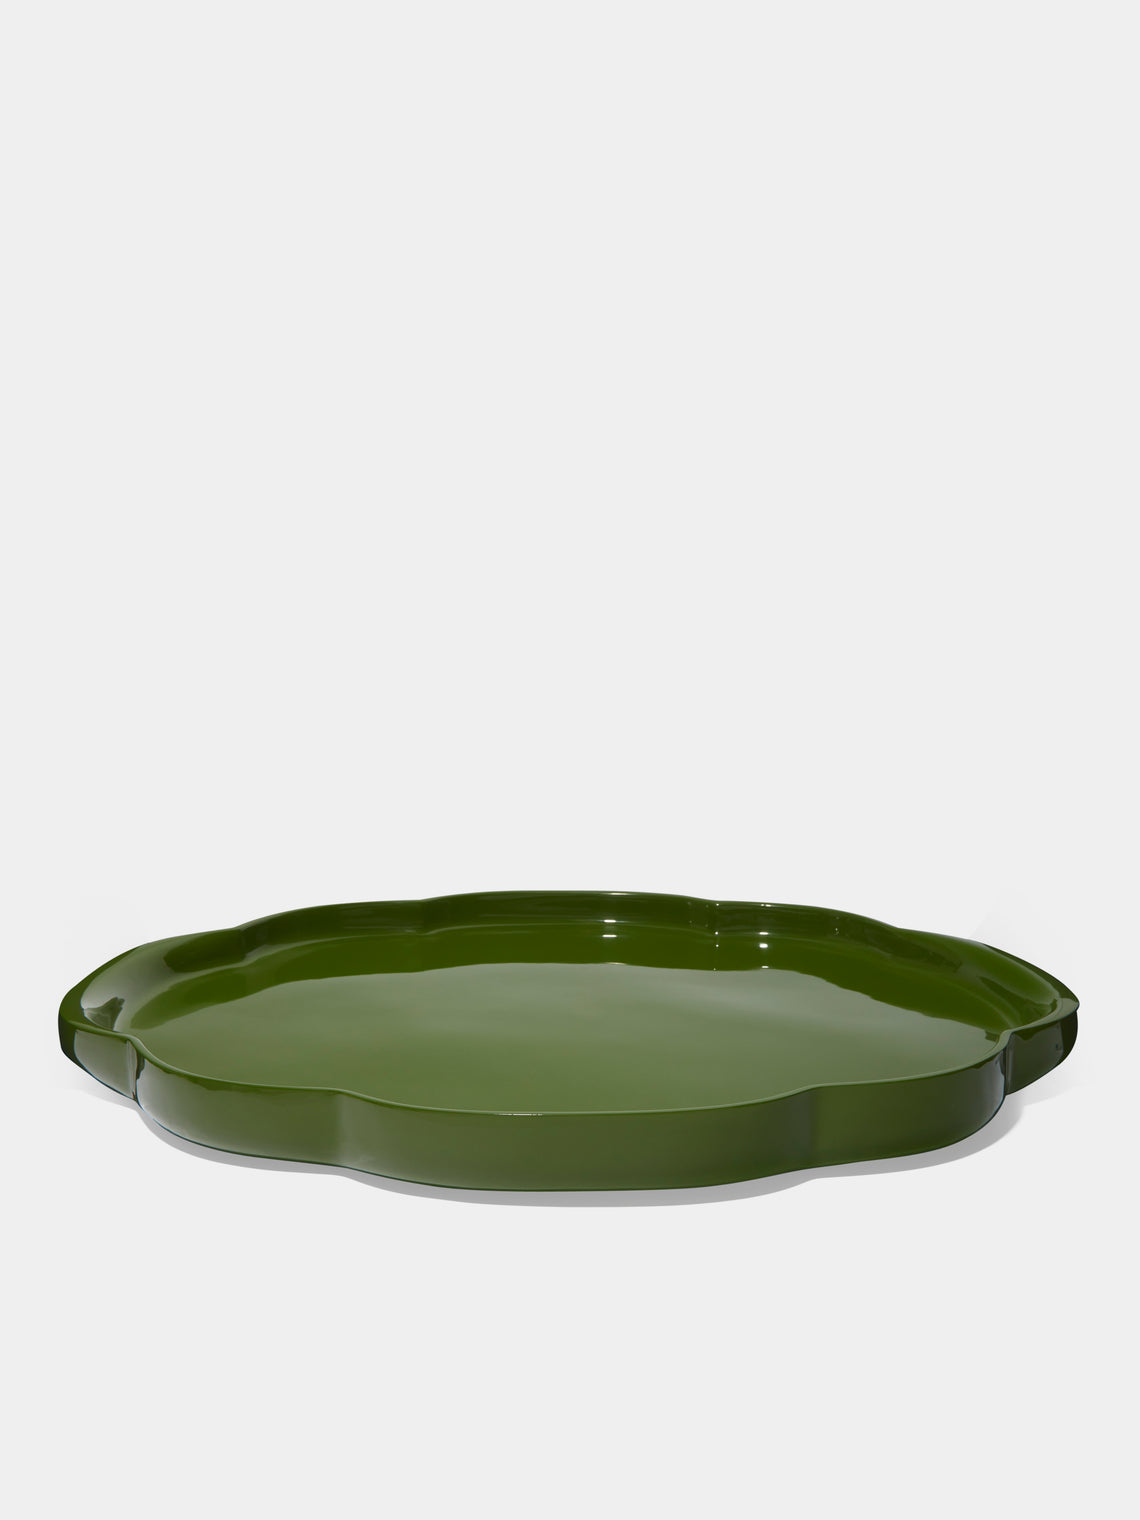 The Lacquer Company - Lacquered Oval Tray - Green - ABASK